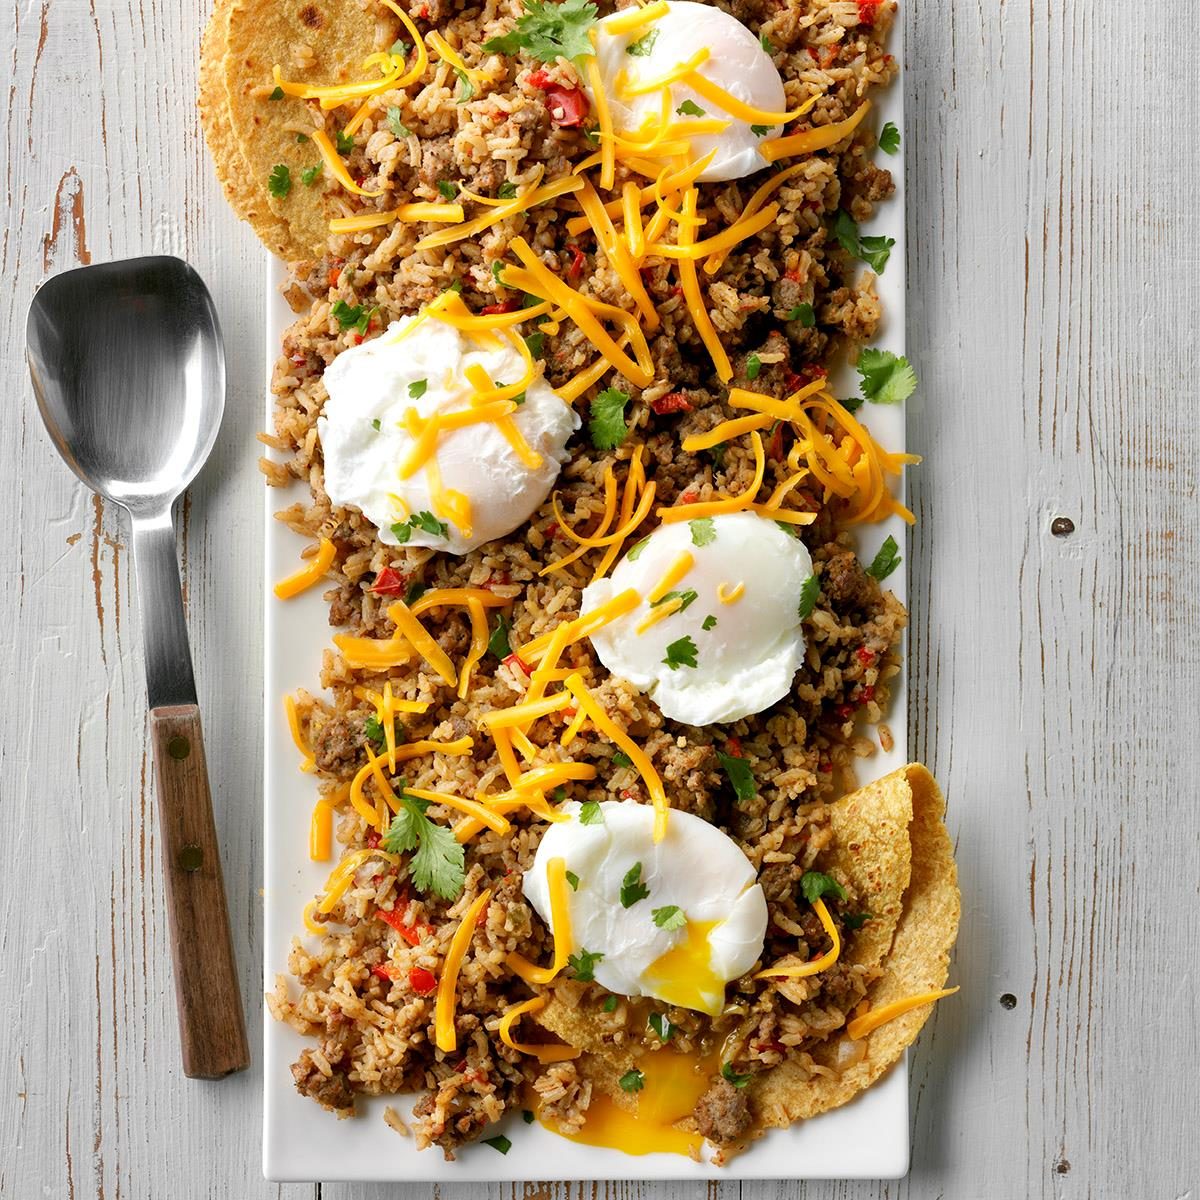 https://www.tasteofhome.com/wp-content/uploads/2018/01/Mexican-Rice-with-Poached-Eggs_EXPS_THAM18_74752_D11_07_6b-5.jpg